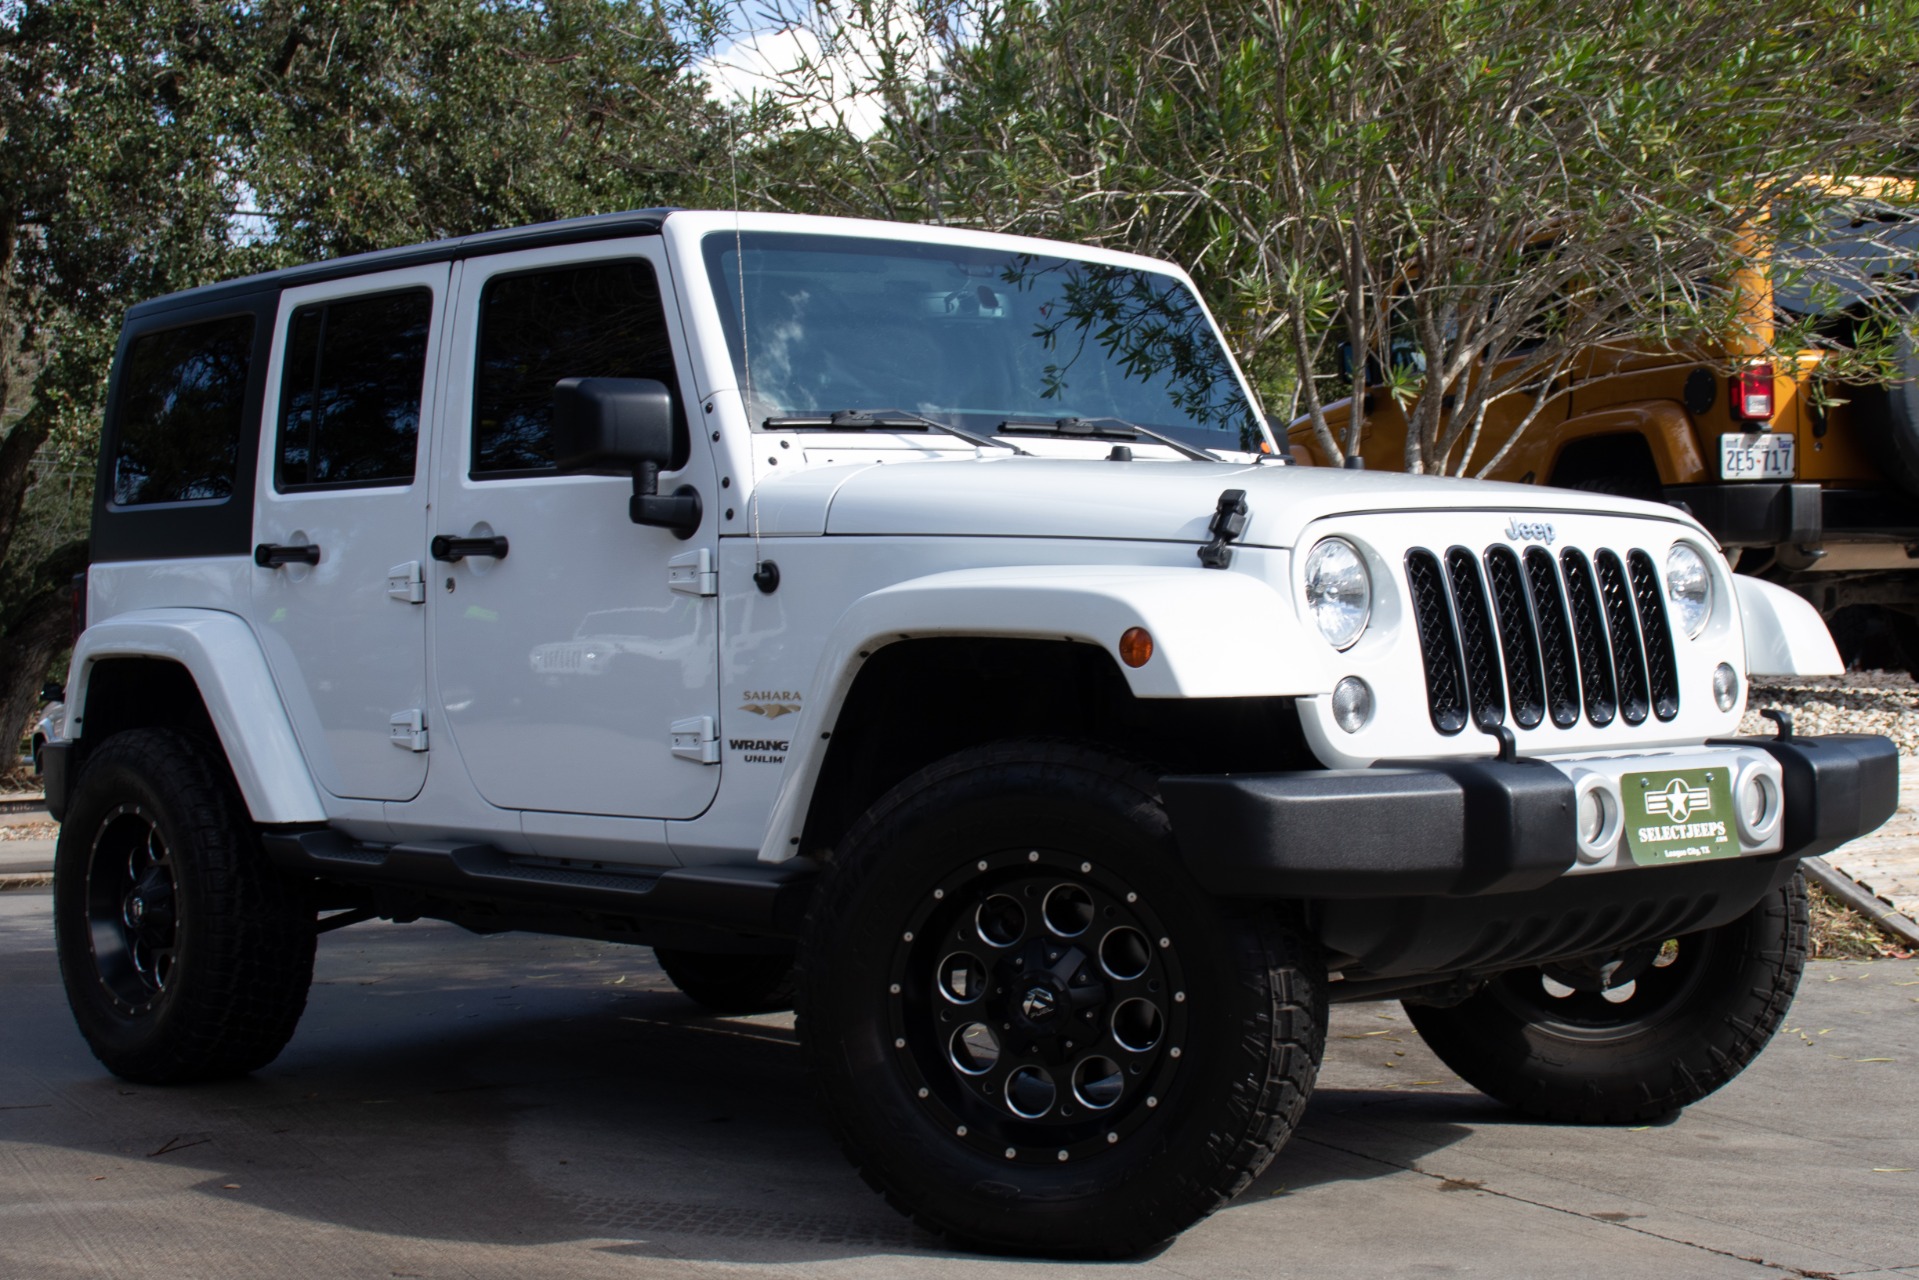 Used 2015 Jeep Wrangler Unlimited Sahara For Sale 27 995